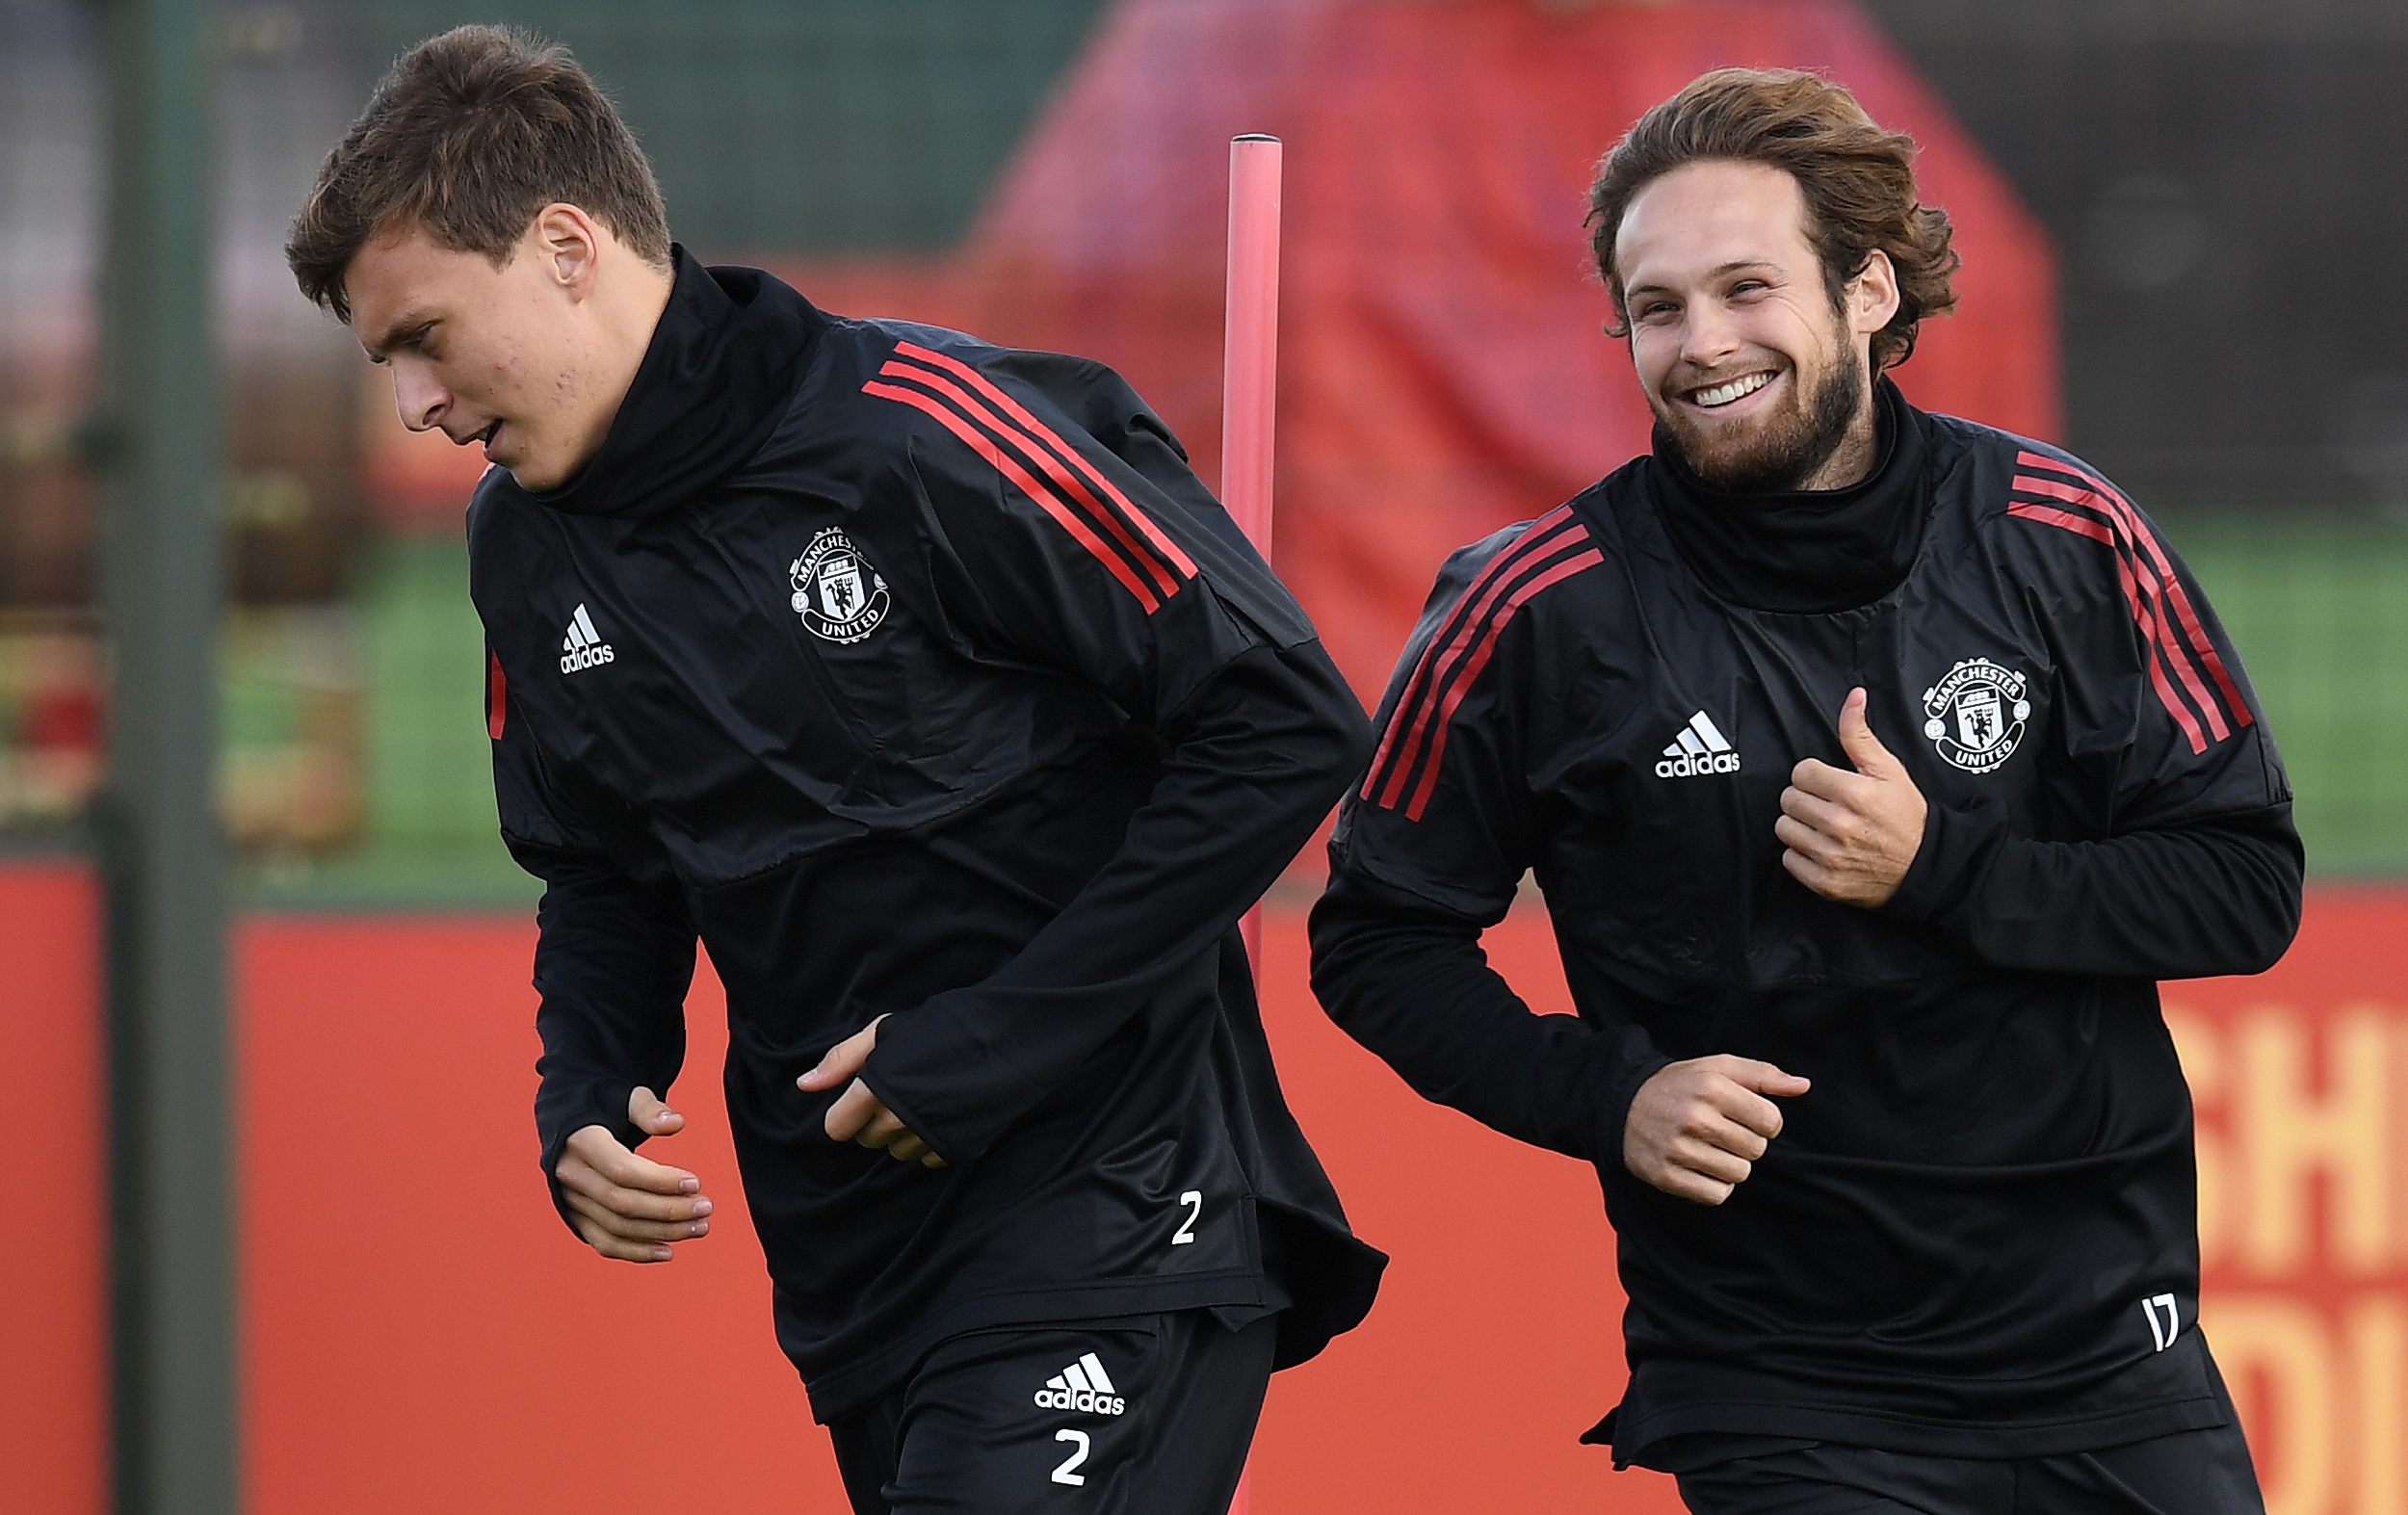 Manchester United's Swedish defender Victor Lindelof (L) and Manchester United's Dutch midfielder Daley Blind attends a team training session at the club's training complex near Carrington, west of Manchester in north west England on September 11, 2017, on the eve of their UEFA Champions League Group A football match against FC Basel. / AFP PHOTO / Paul ELLIS        (Photo credit should read PAUL ELLIS/AFP/Getty Images)